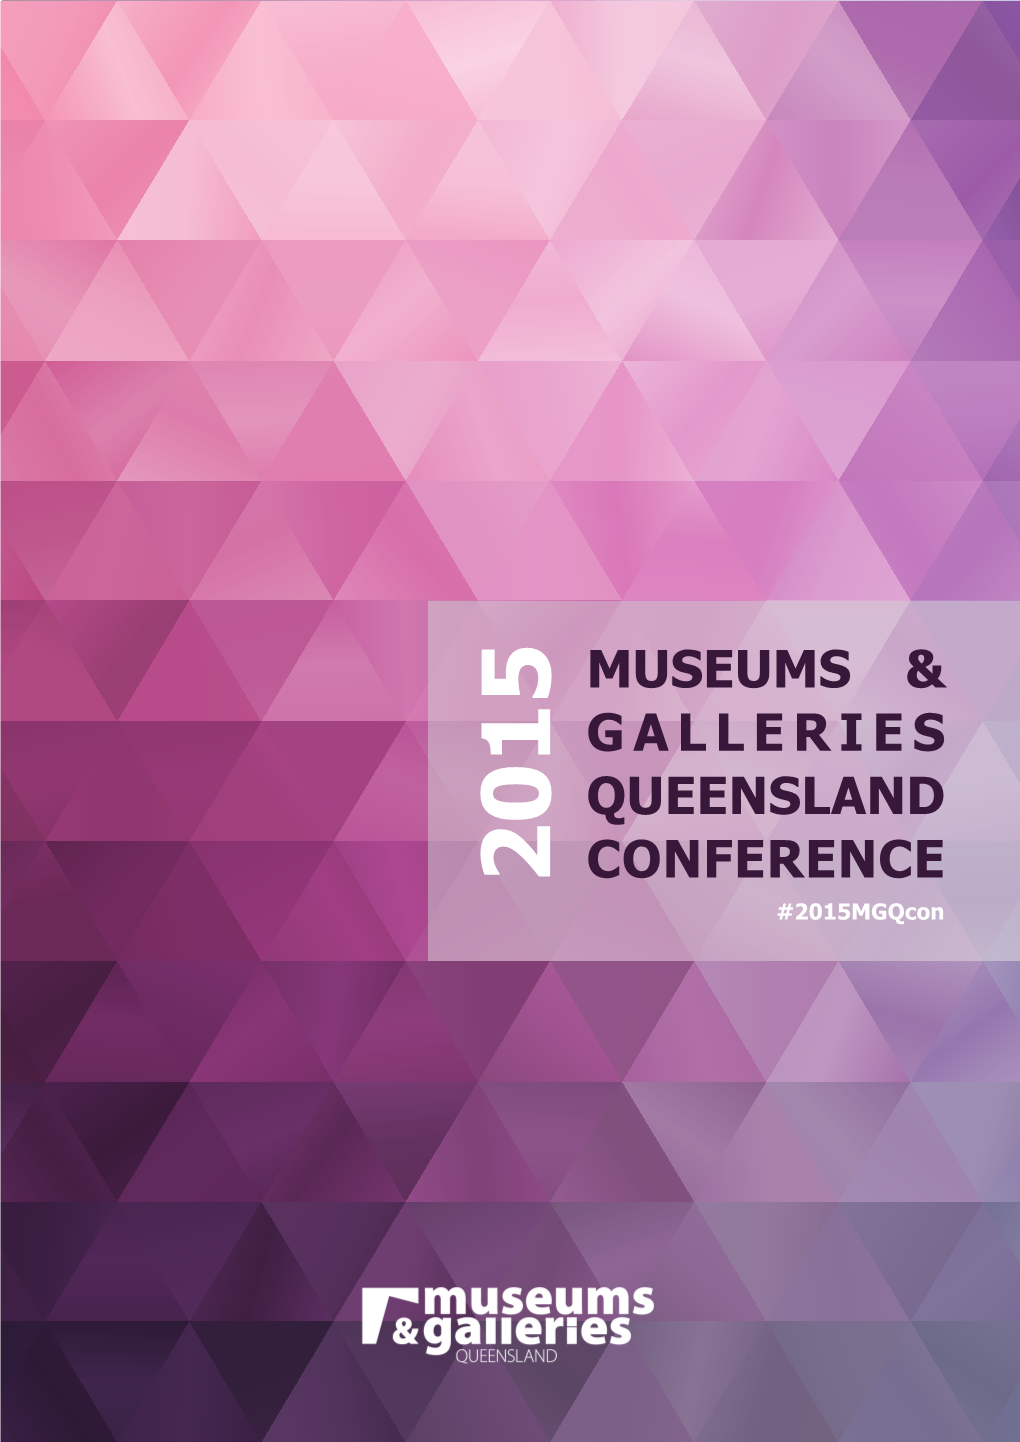 Galleries Queensland Conference 1 2 2015 Museums & Galleries Queensland Conference #2015Mgqcon Conference Rooms: the Workshops Rail Museum